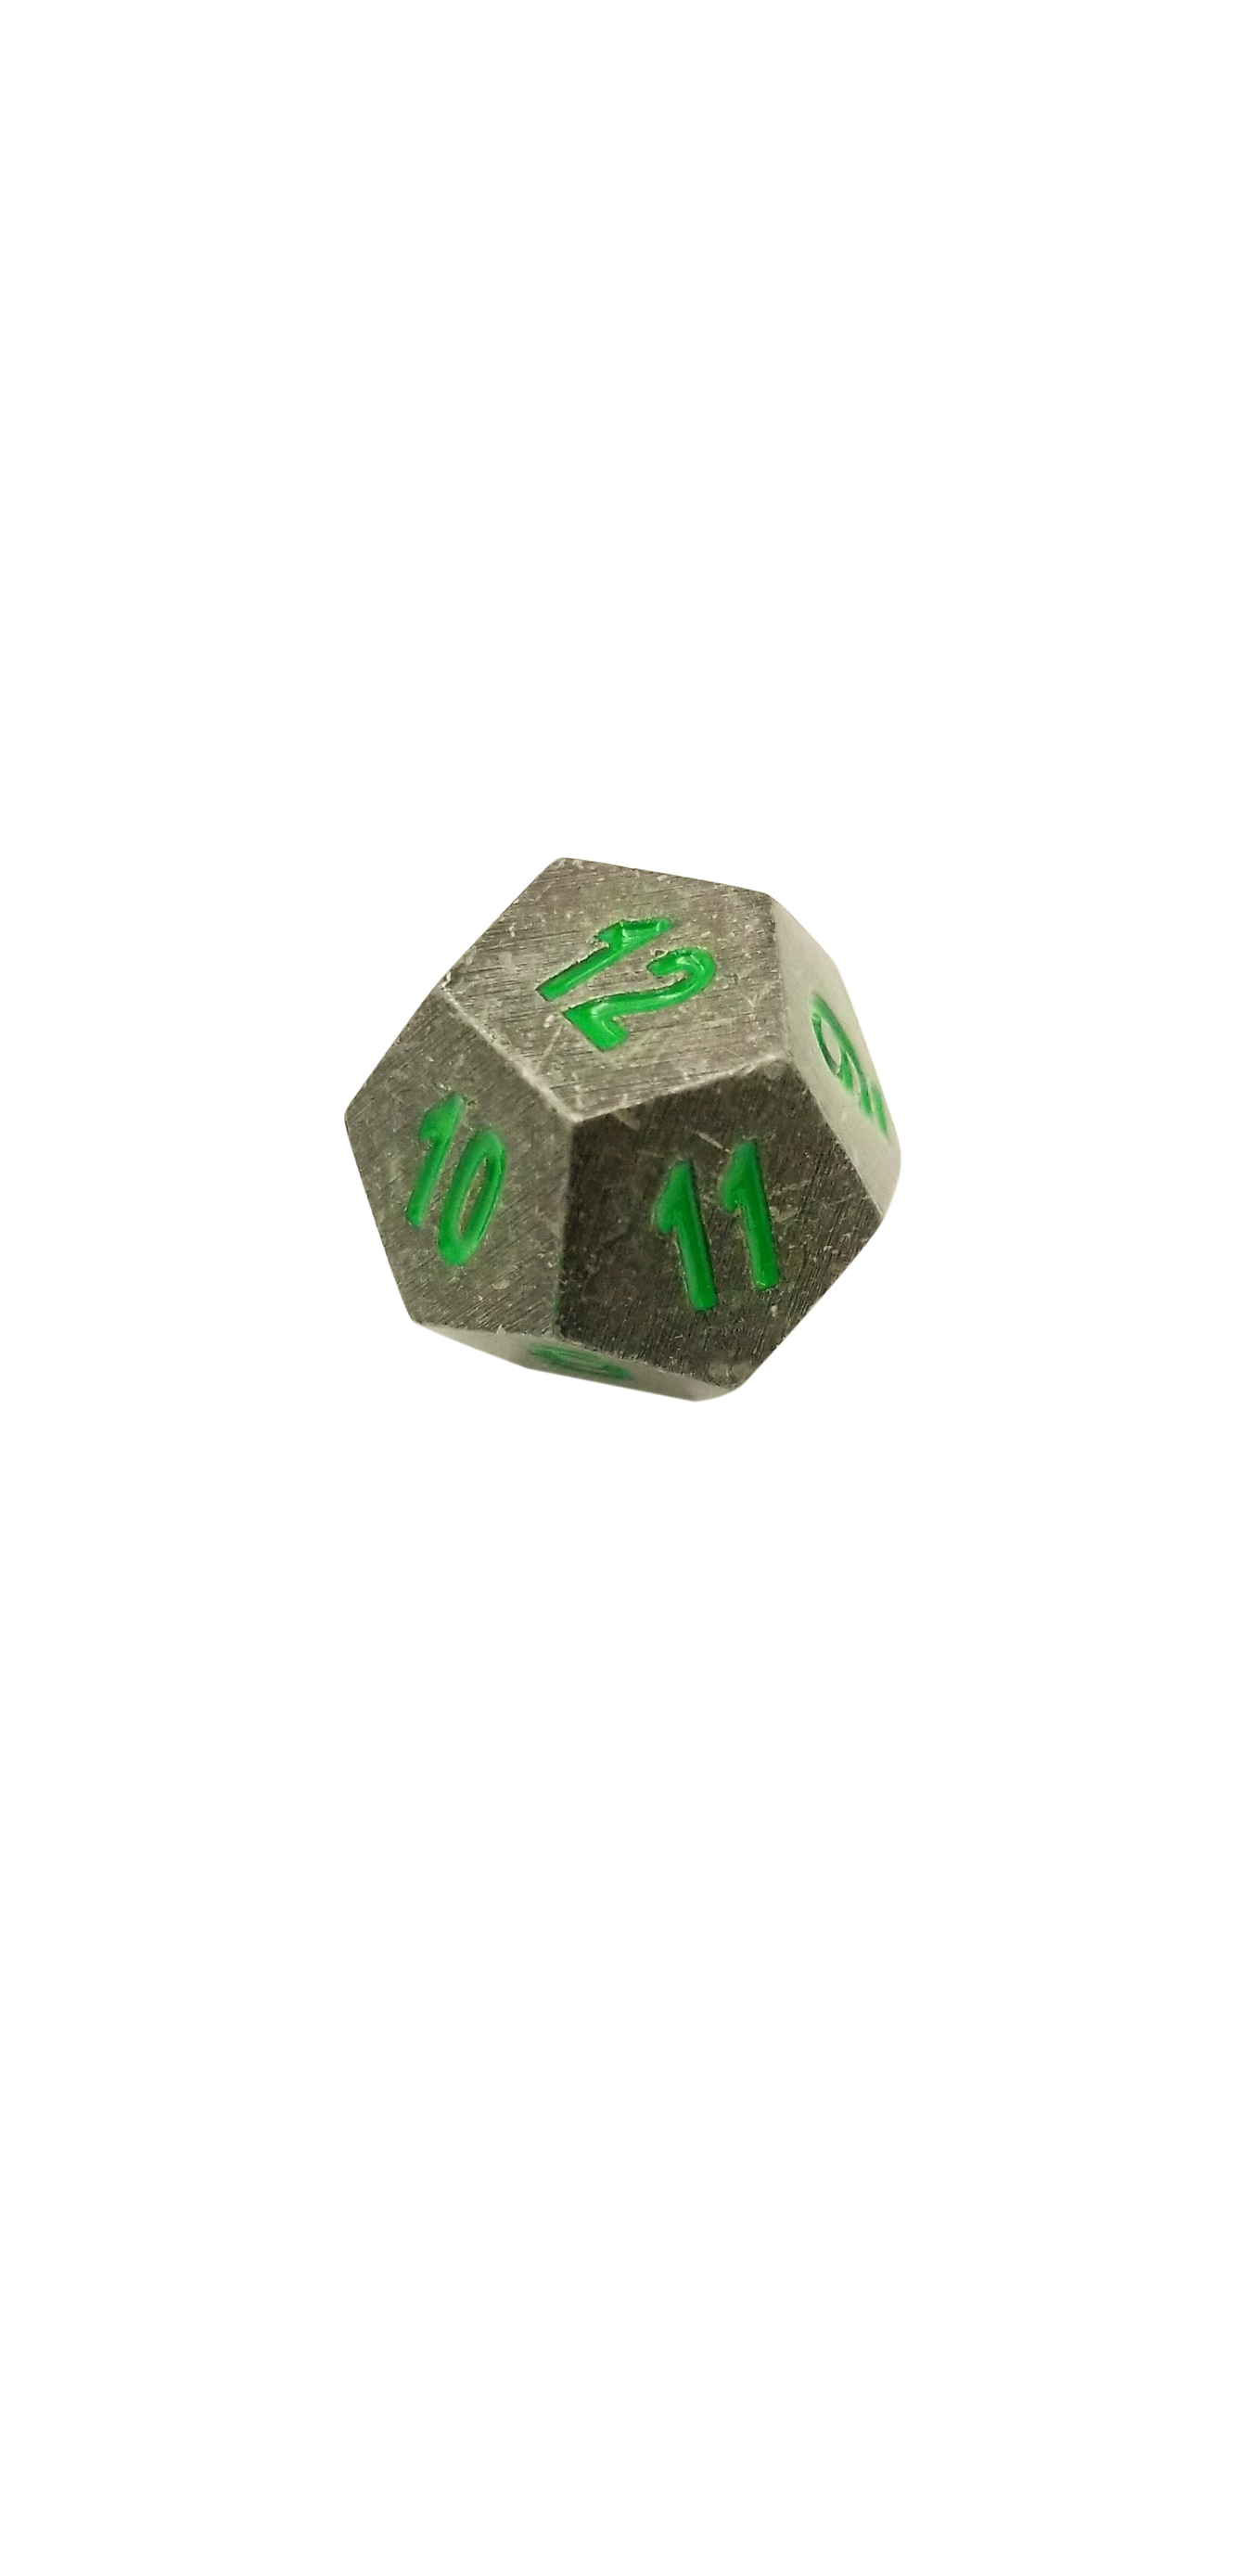 Single Metal D12 for DND